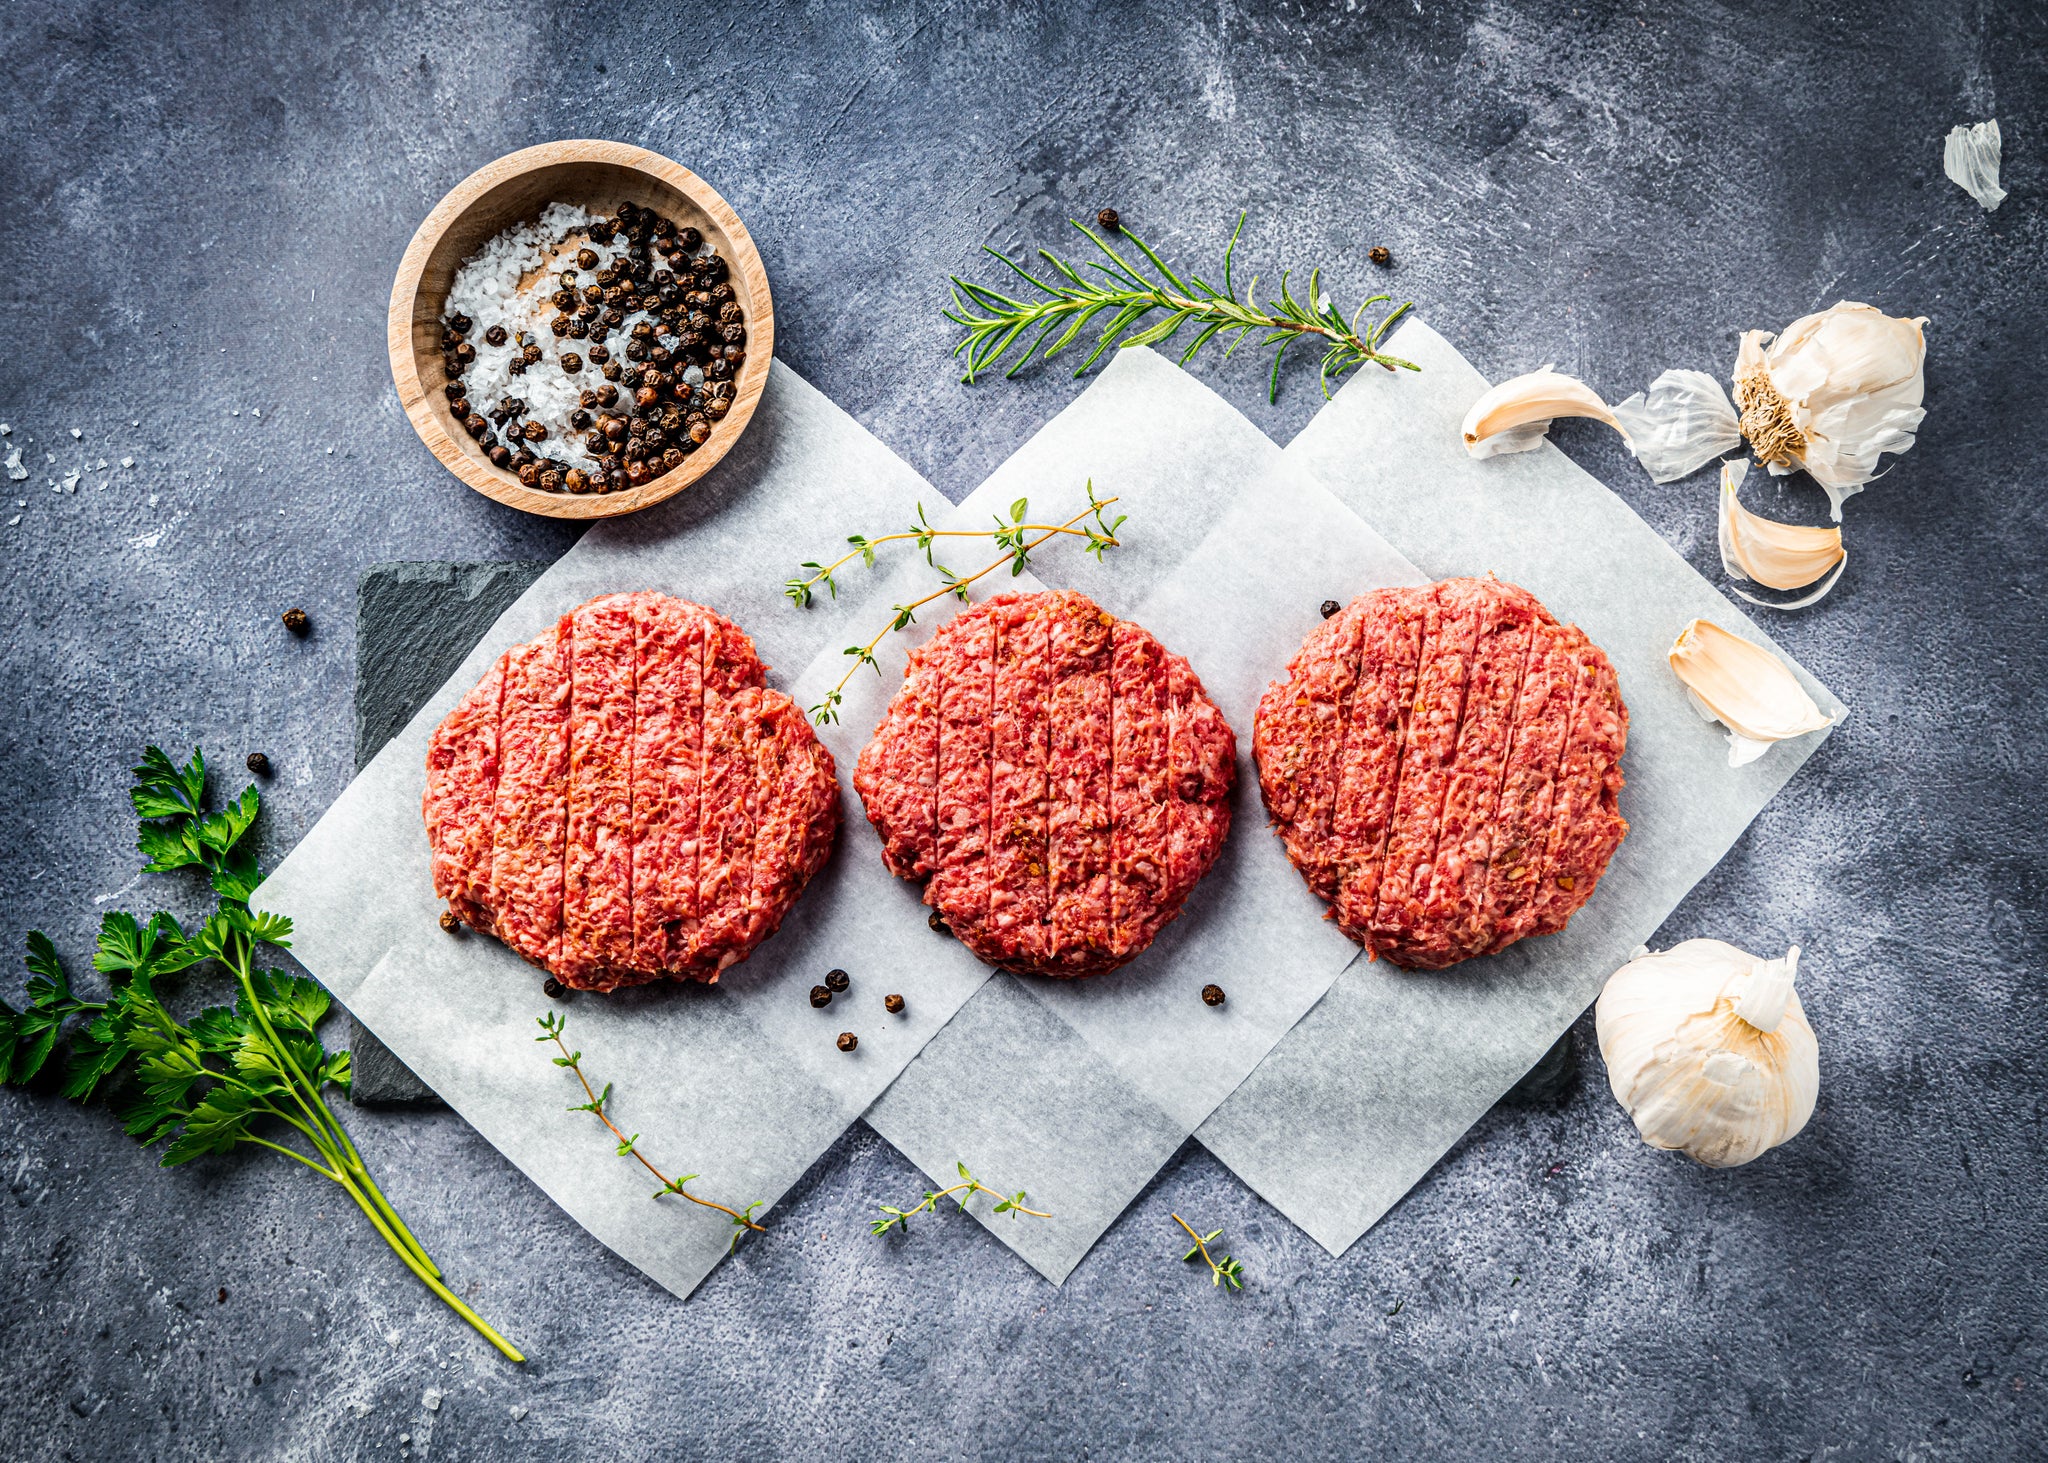 Wagyu Ground Beef - Craft Wagyu steaks and beef delivery in Dallas ...